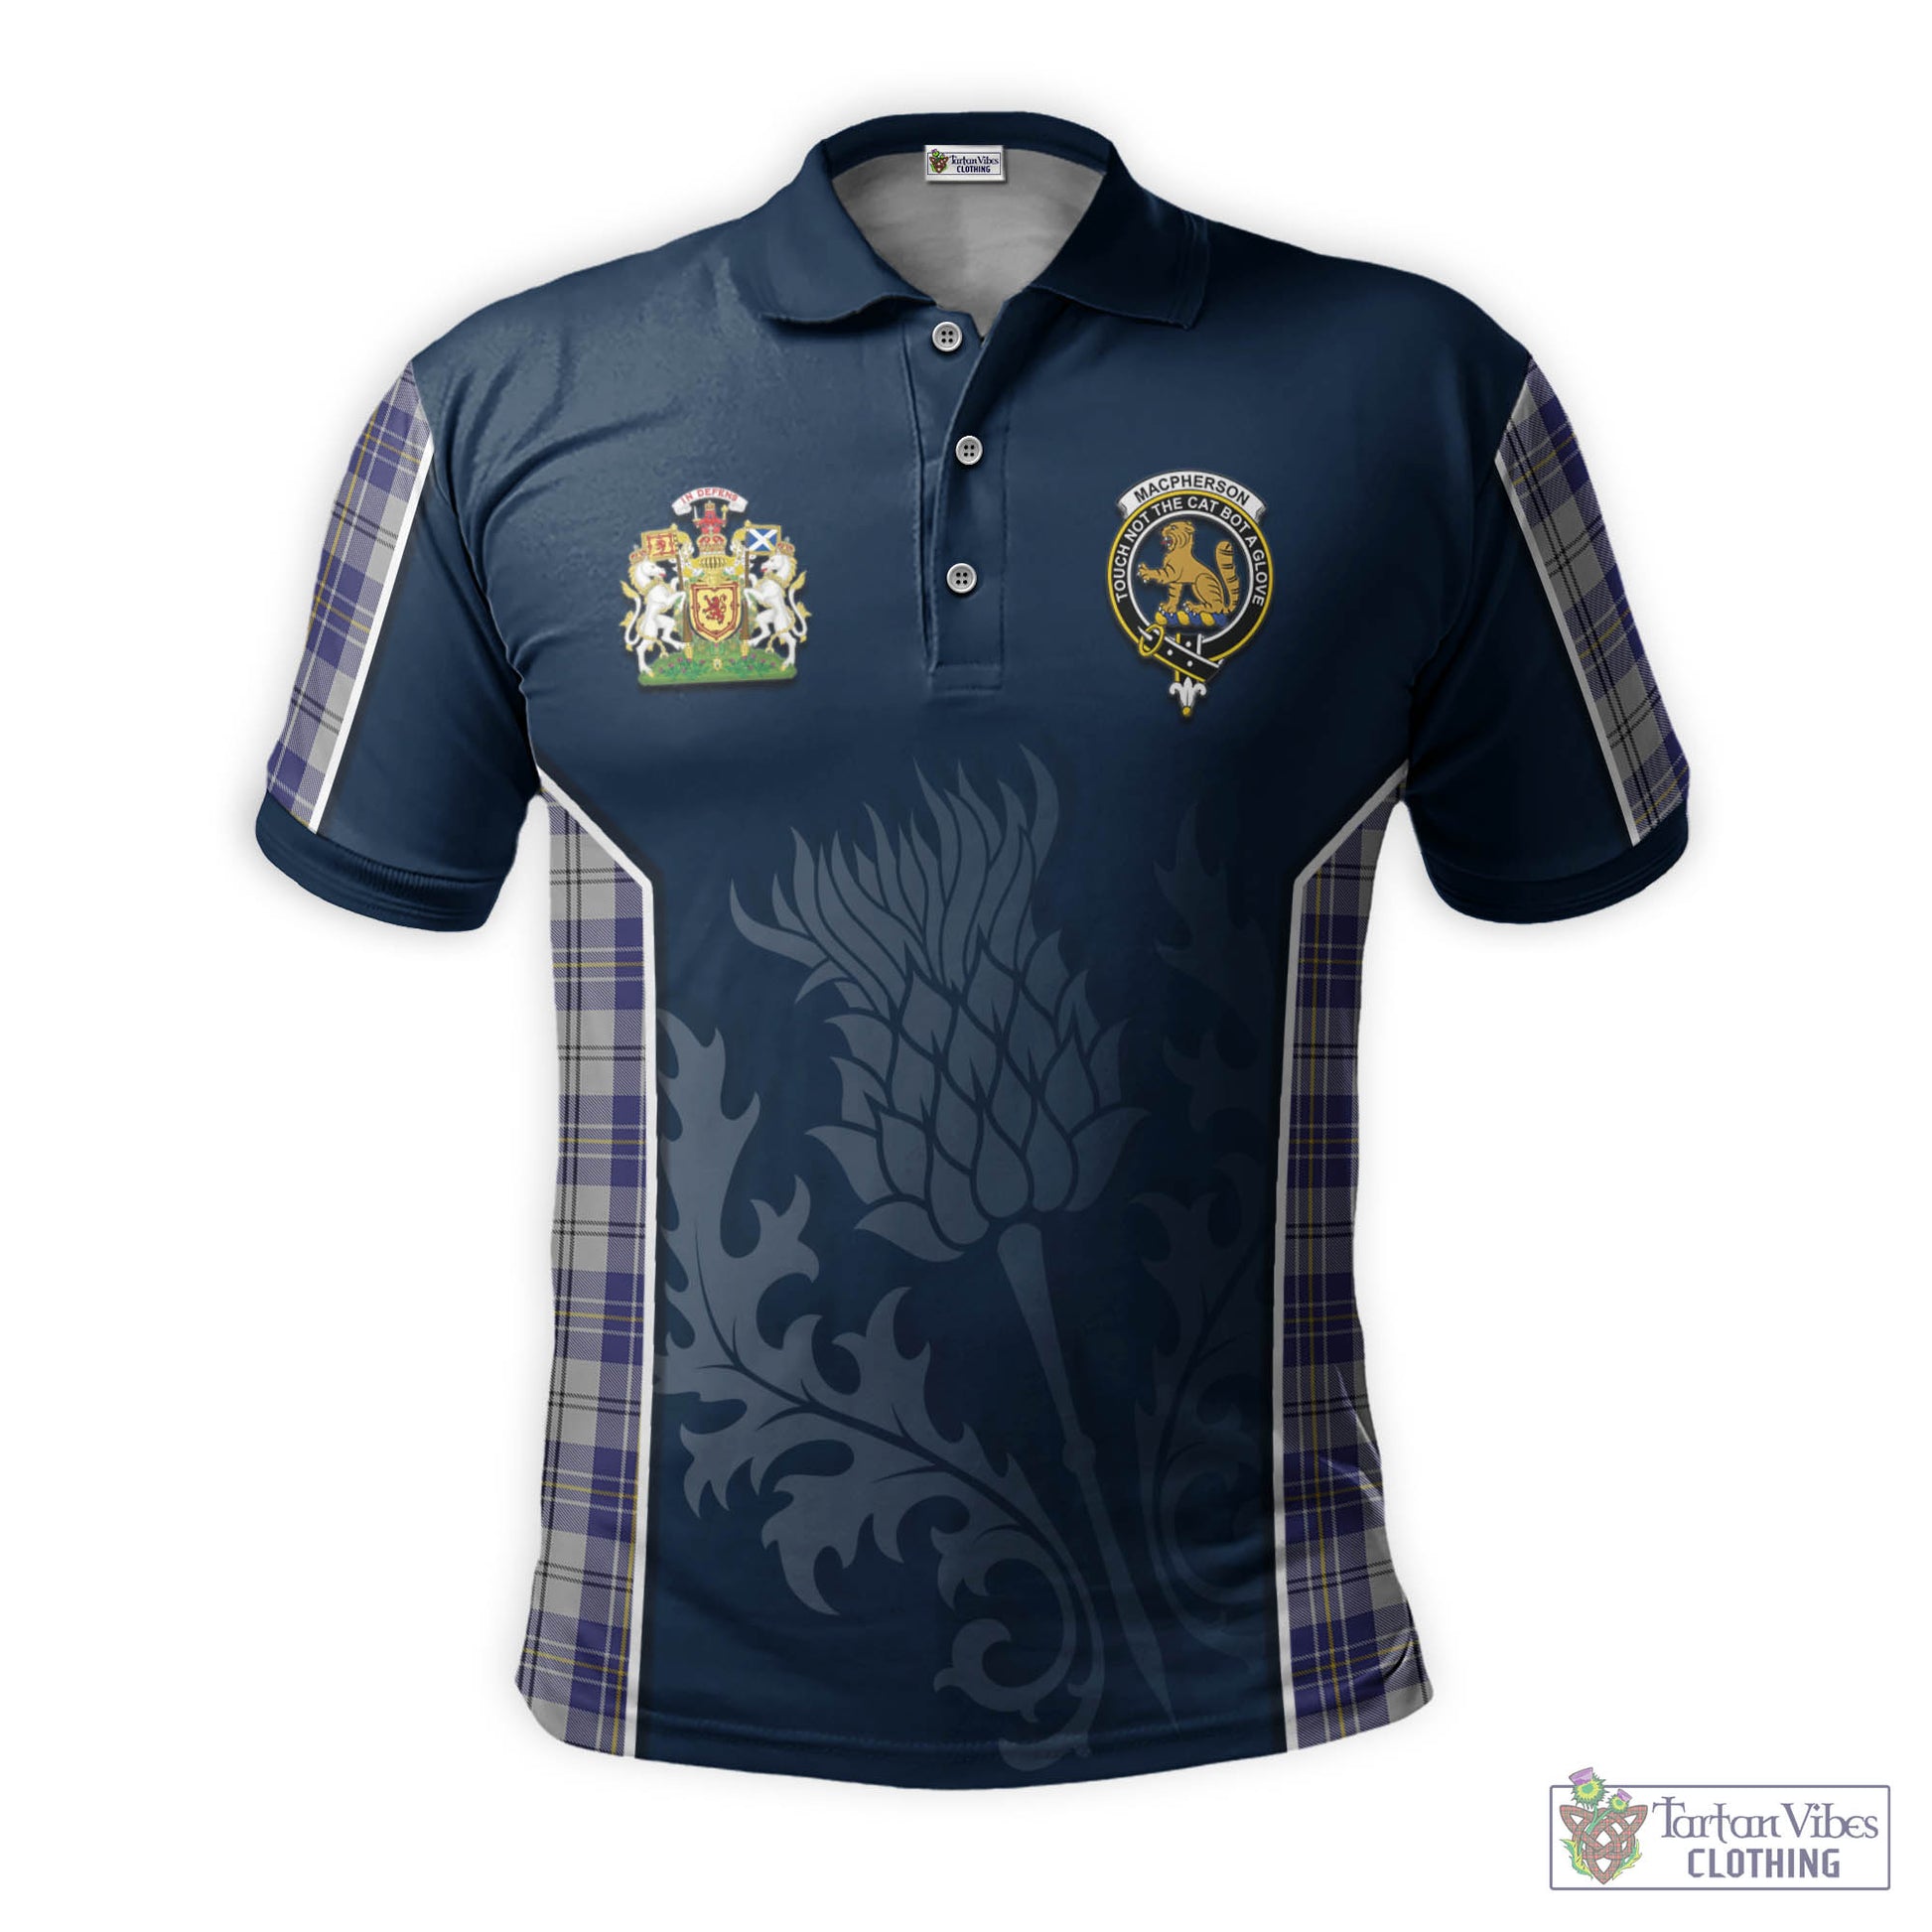 Tartan Vibes Clothing MacPherson Dress Blue Tartan Men's Polo Shirt with Family Crest and Scottish Thistle Vibes Sport Style